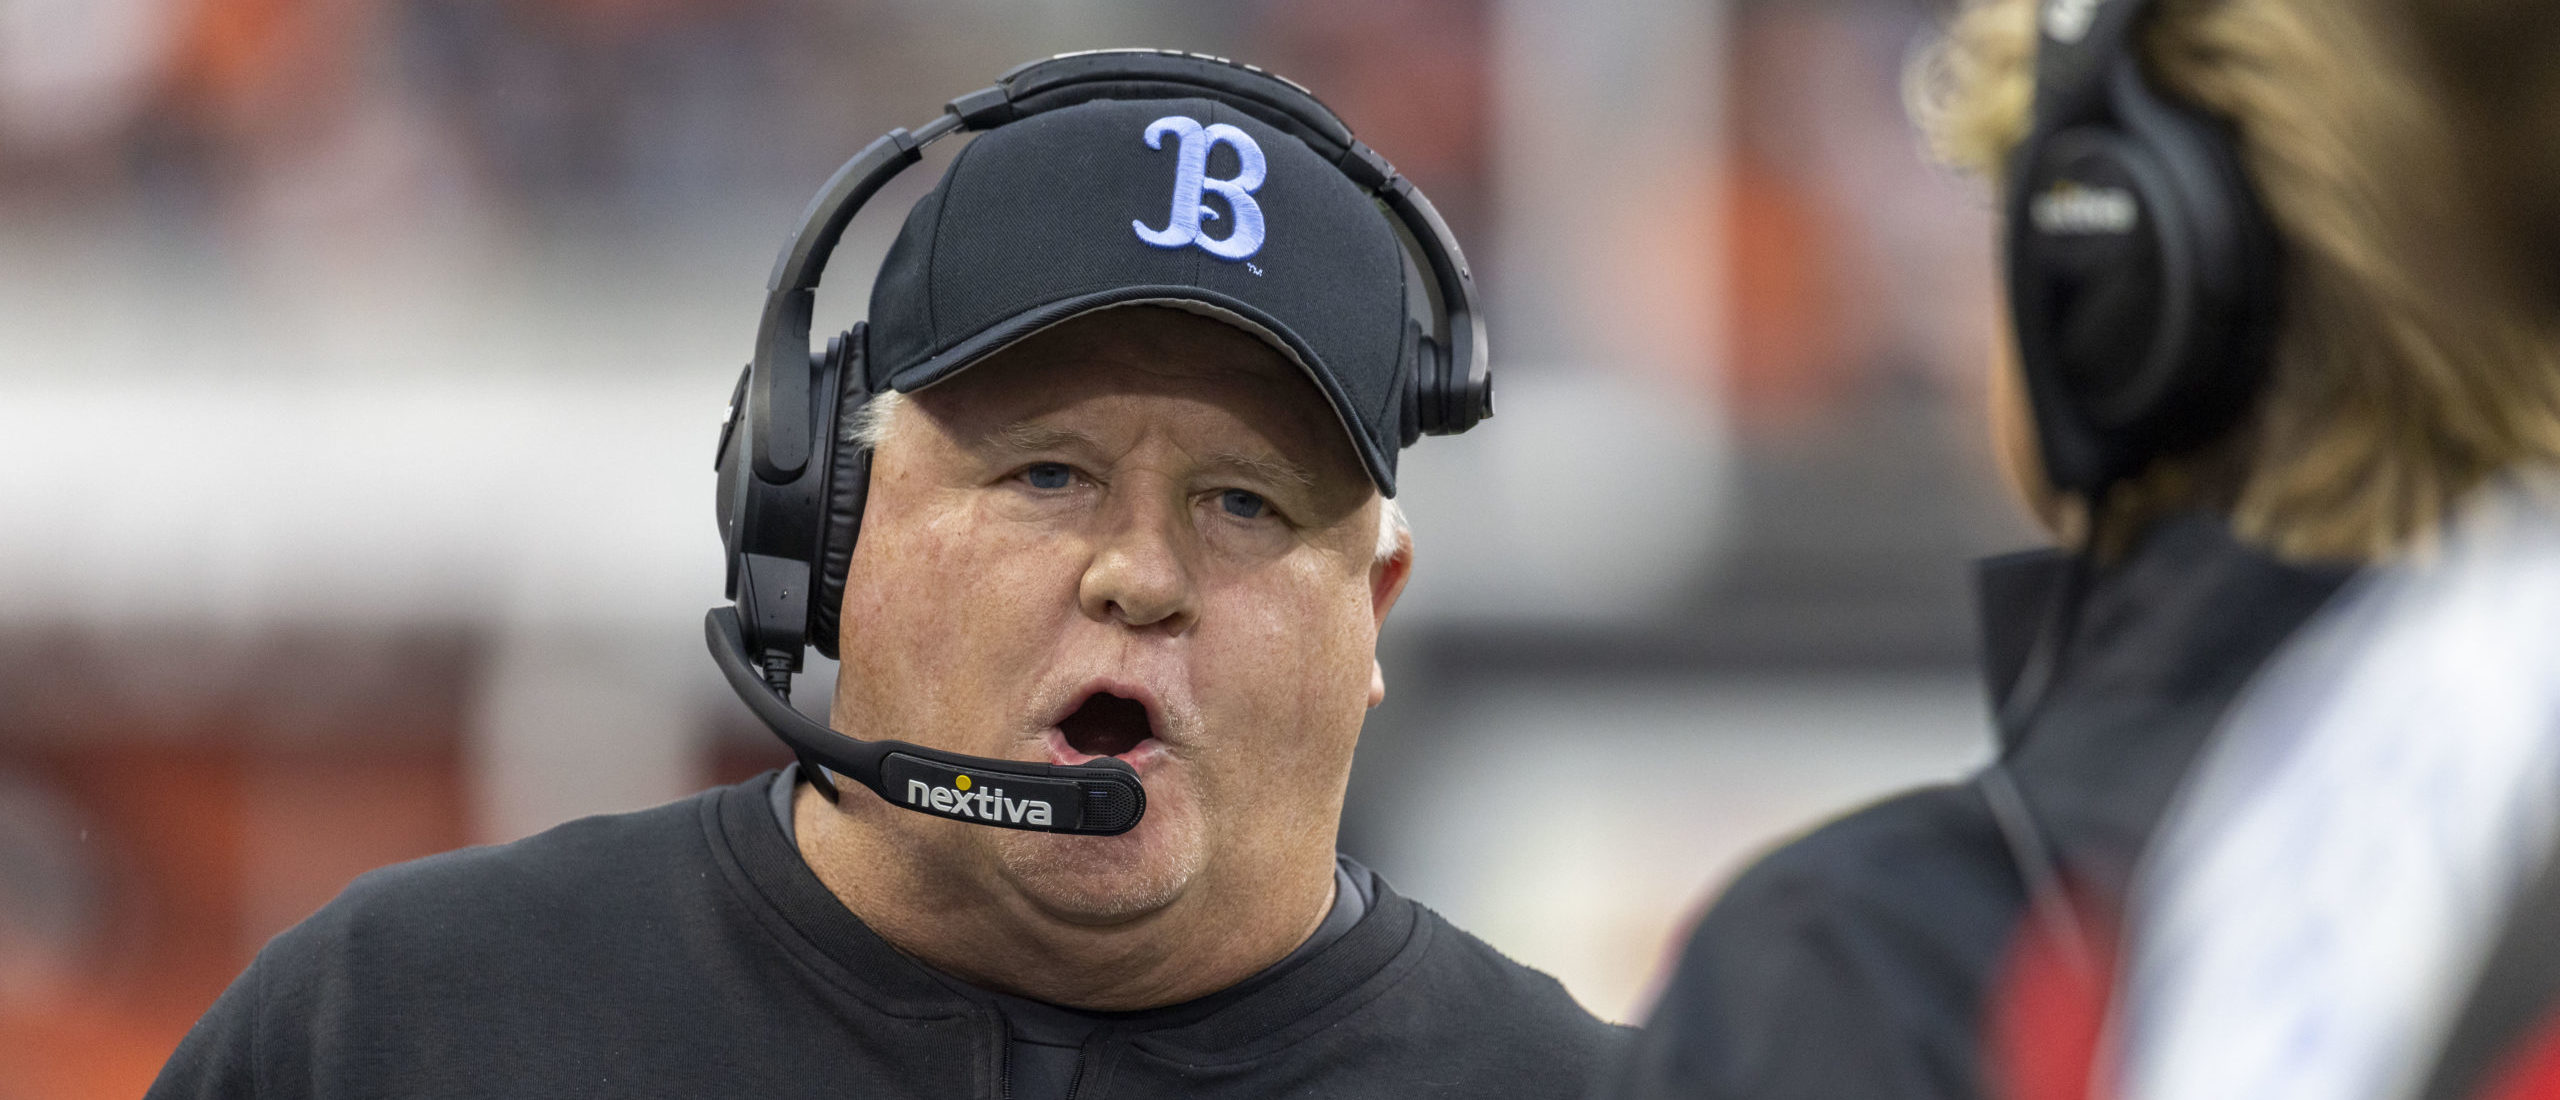 Major College Football Program Makes Quick Coaching Pivot To Hire Failed Former NFL Skipper Chip Kelly: REPORT